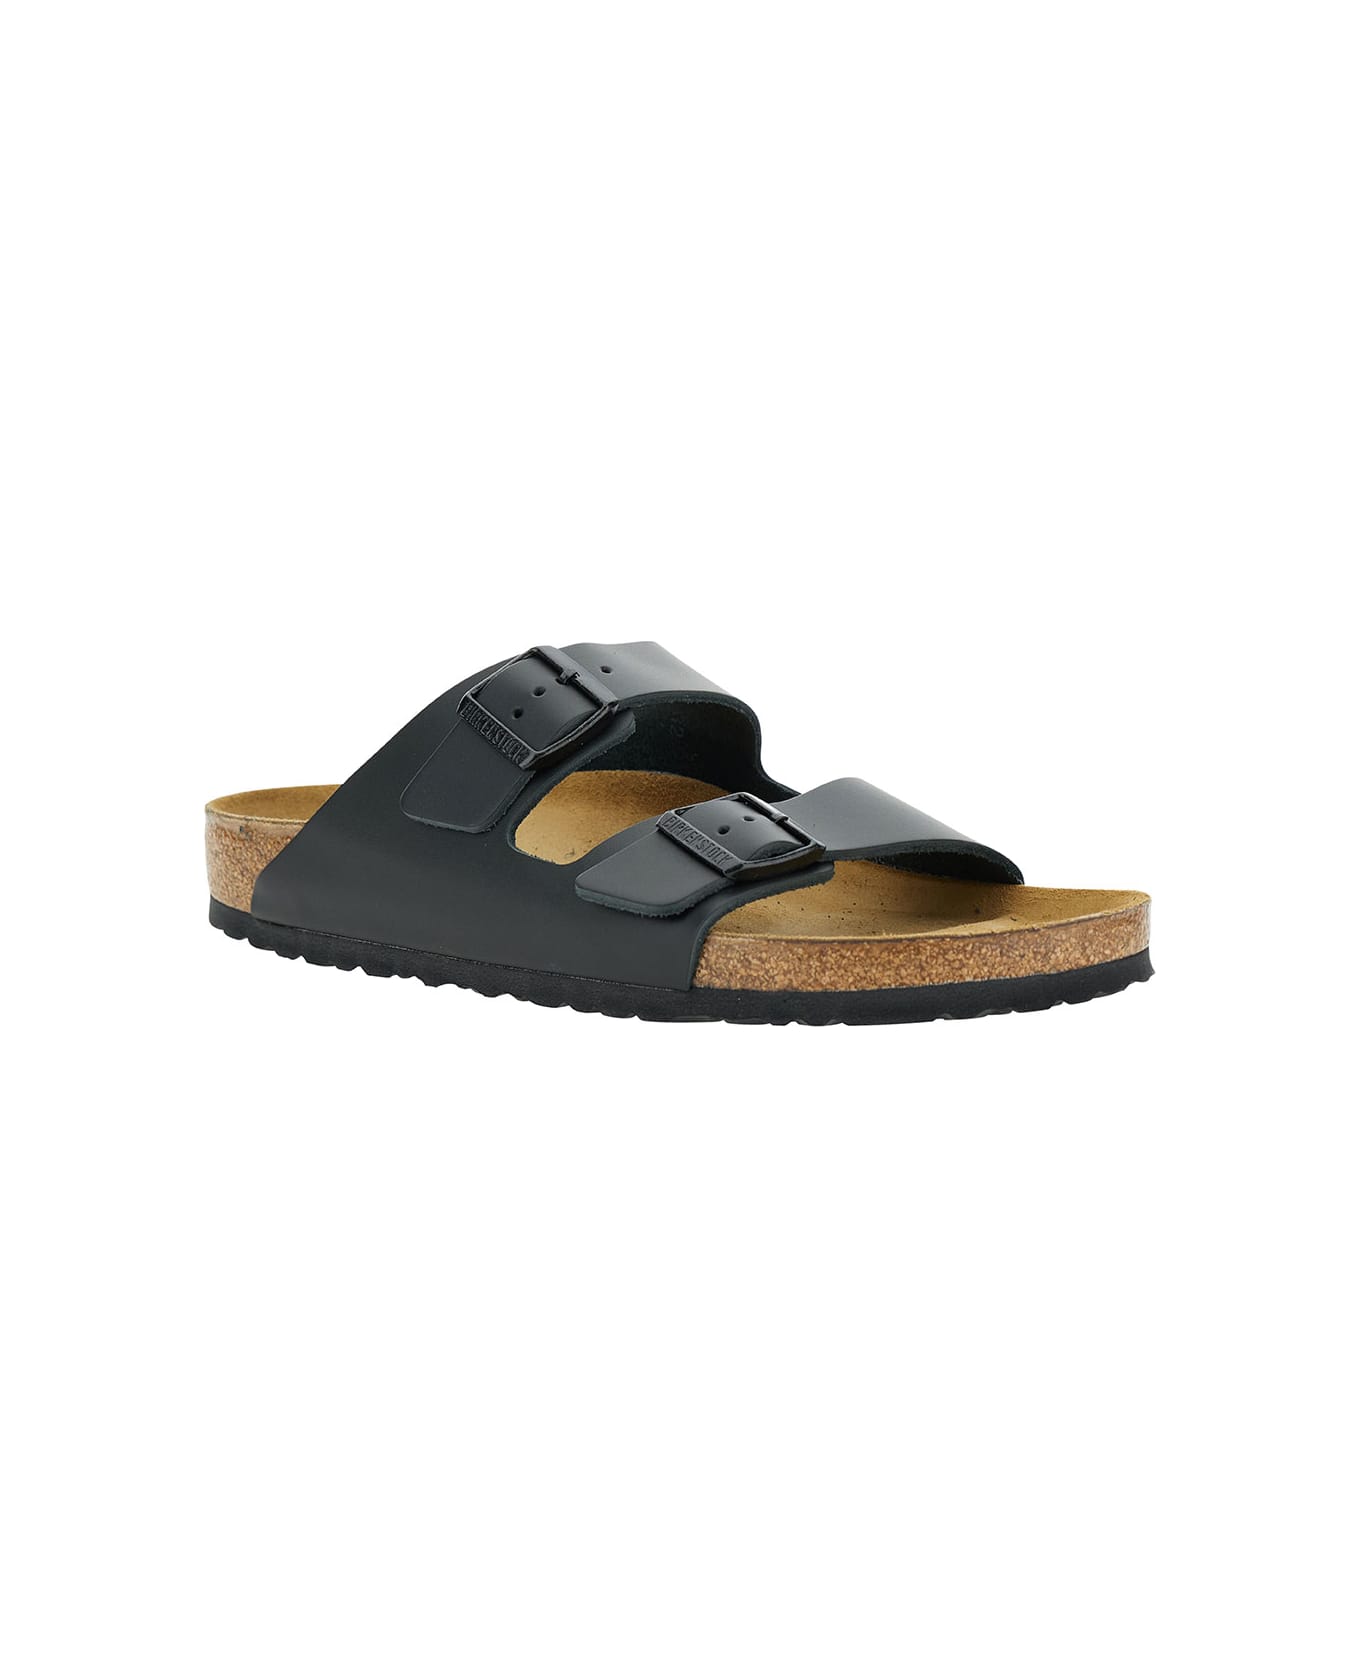 Birkenstock Black Slip-on Sandals With Engraved Logo In Leather And Cork Man - Black その他各種シューズ